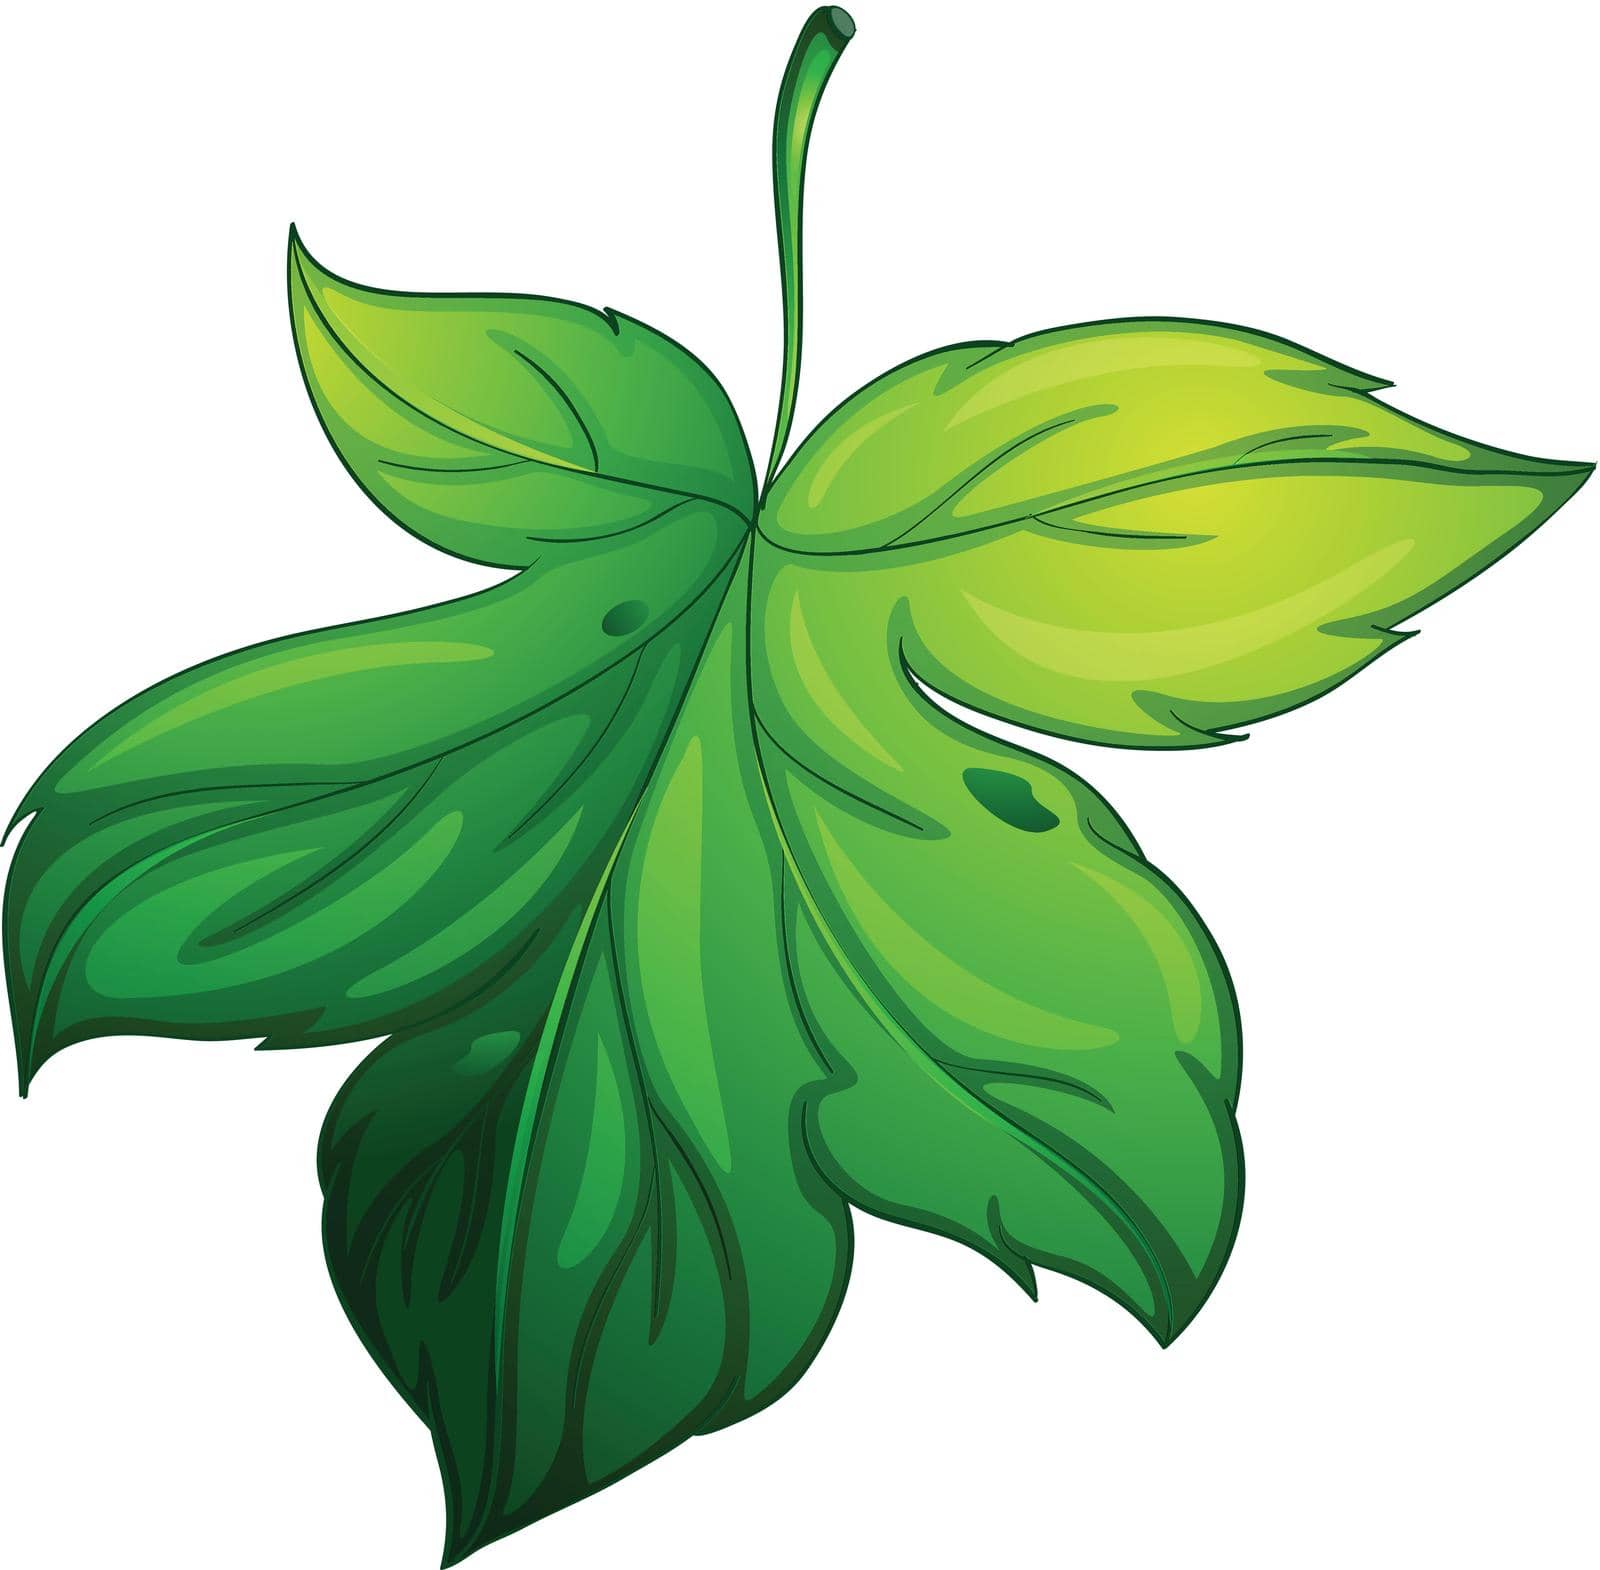 illustration of a green leaf on a white background